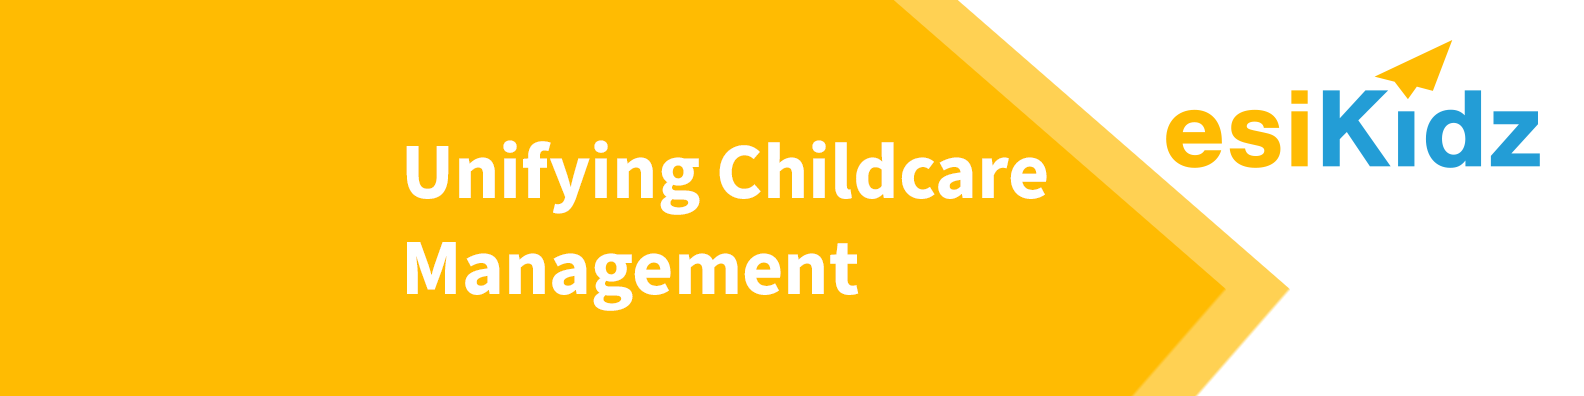 esiKidz is designed to unify all types of Childcare Centre Operations